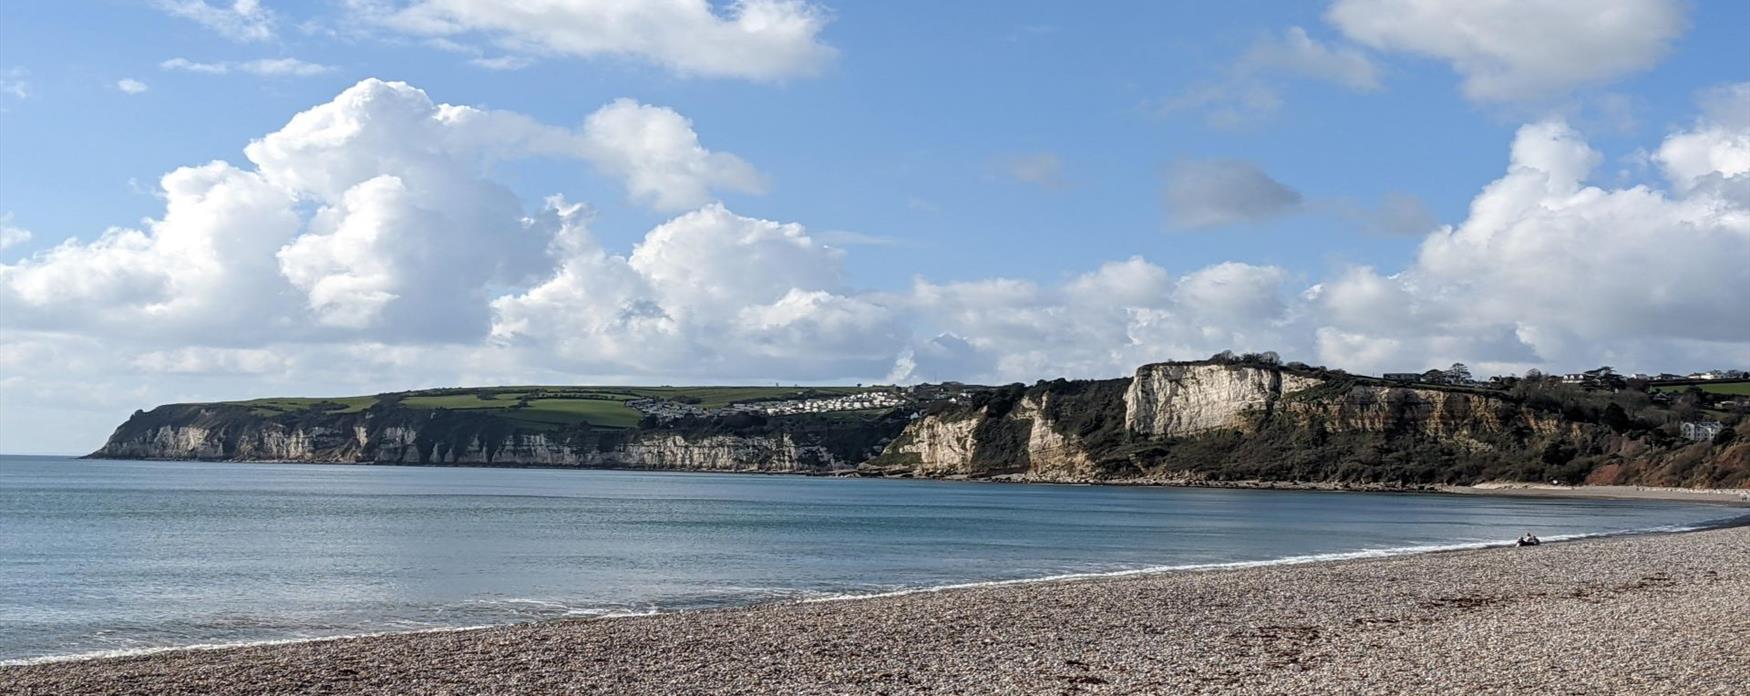 A sweeping view of the landscape from Seaton to Salcombe Hill. The cliffs are predominantly of the white chalk cliffs of Beer, with red cliffs in the foreground. The beach where the photographer is stood is a pebble beach. The sun is shining off the bright blue sea on the left side of the image.